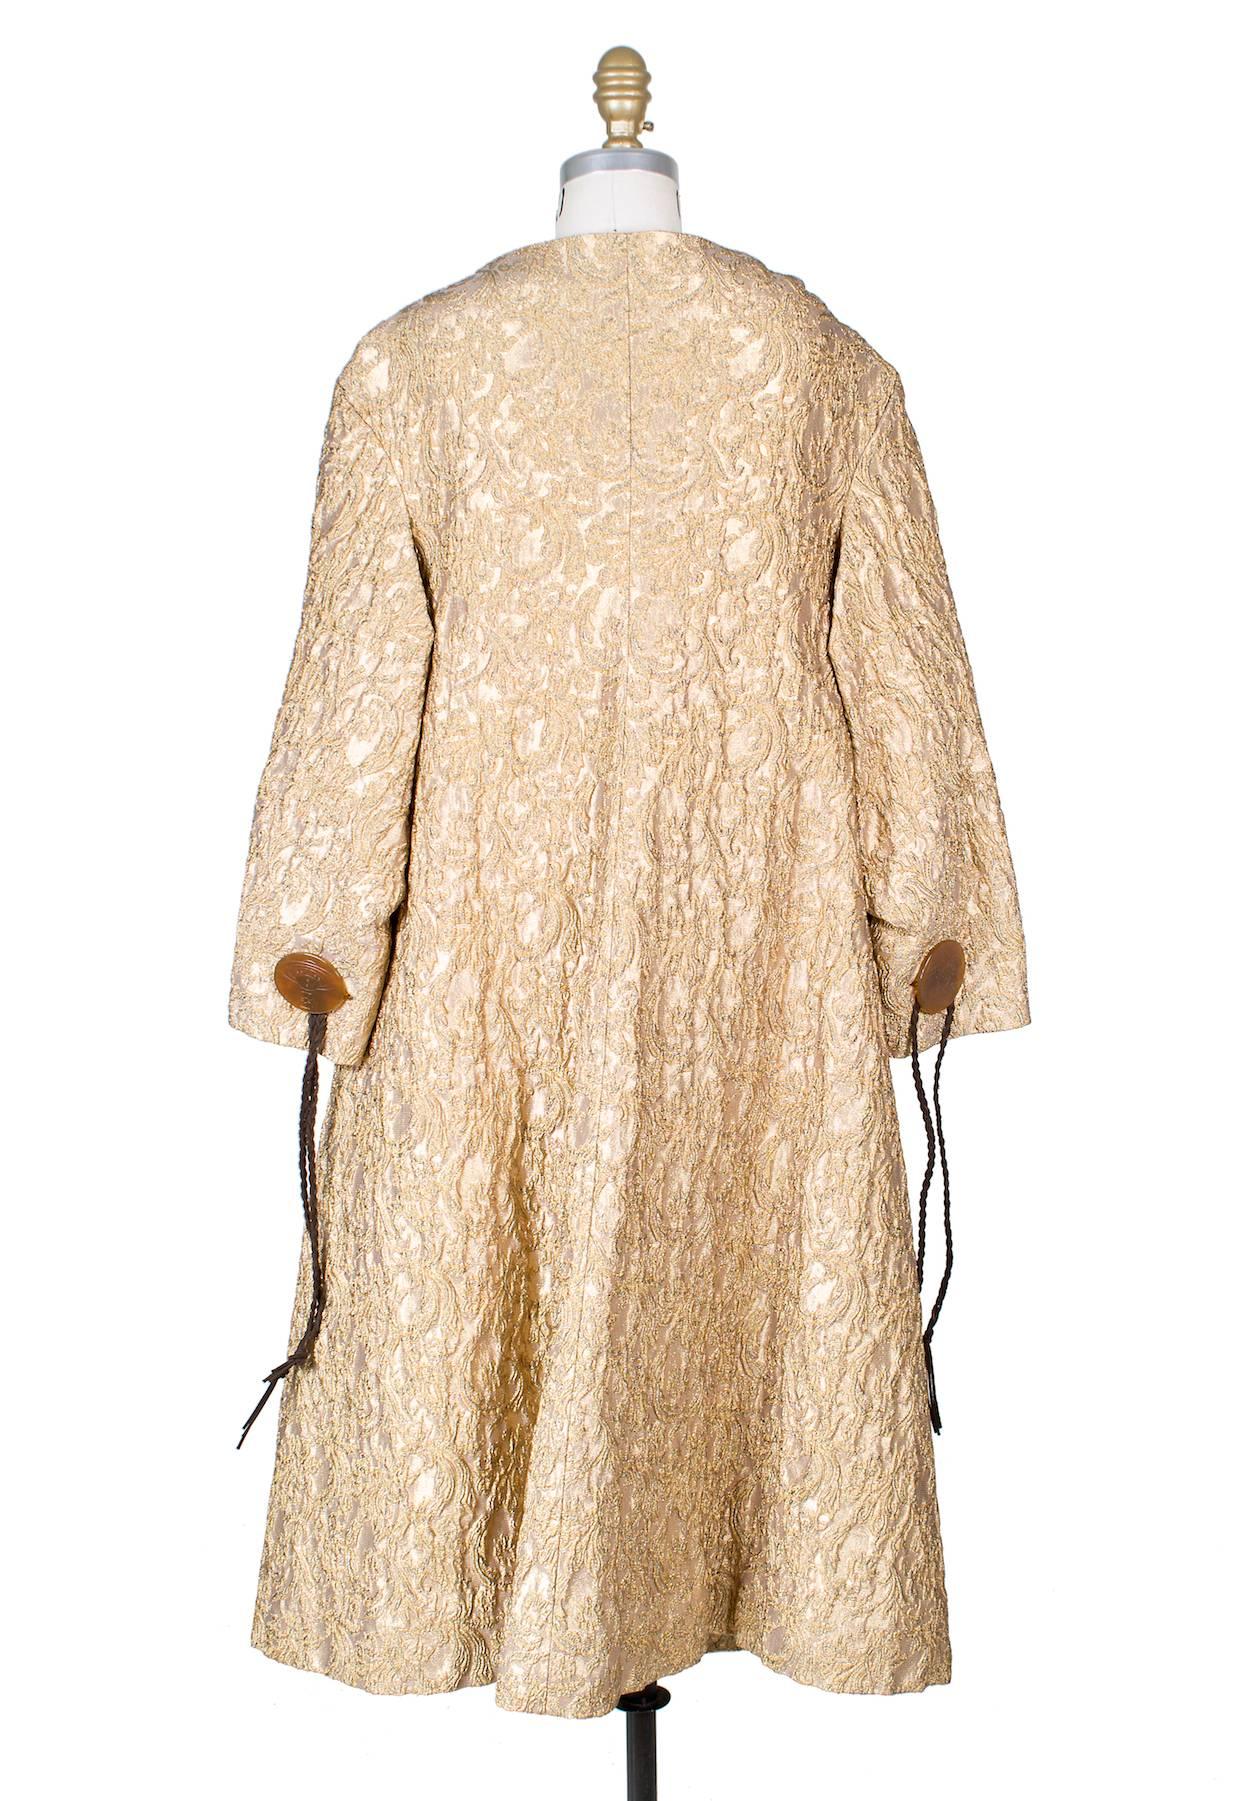 Coat by Vivienne Westwood.  It is made from a textured gold brocade fabric and features large buttons with braided suede strings and 3/4 sleeves.  It is lined in a quilted satin.  

18